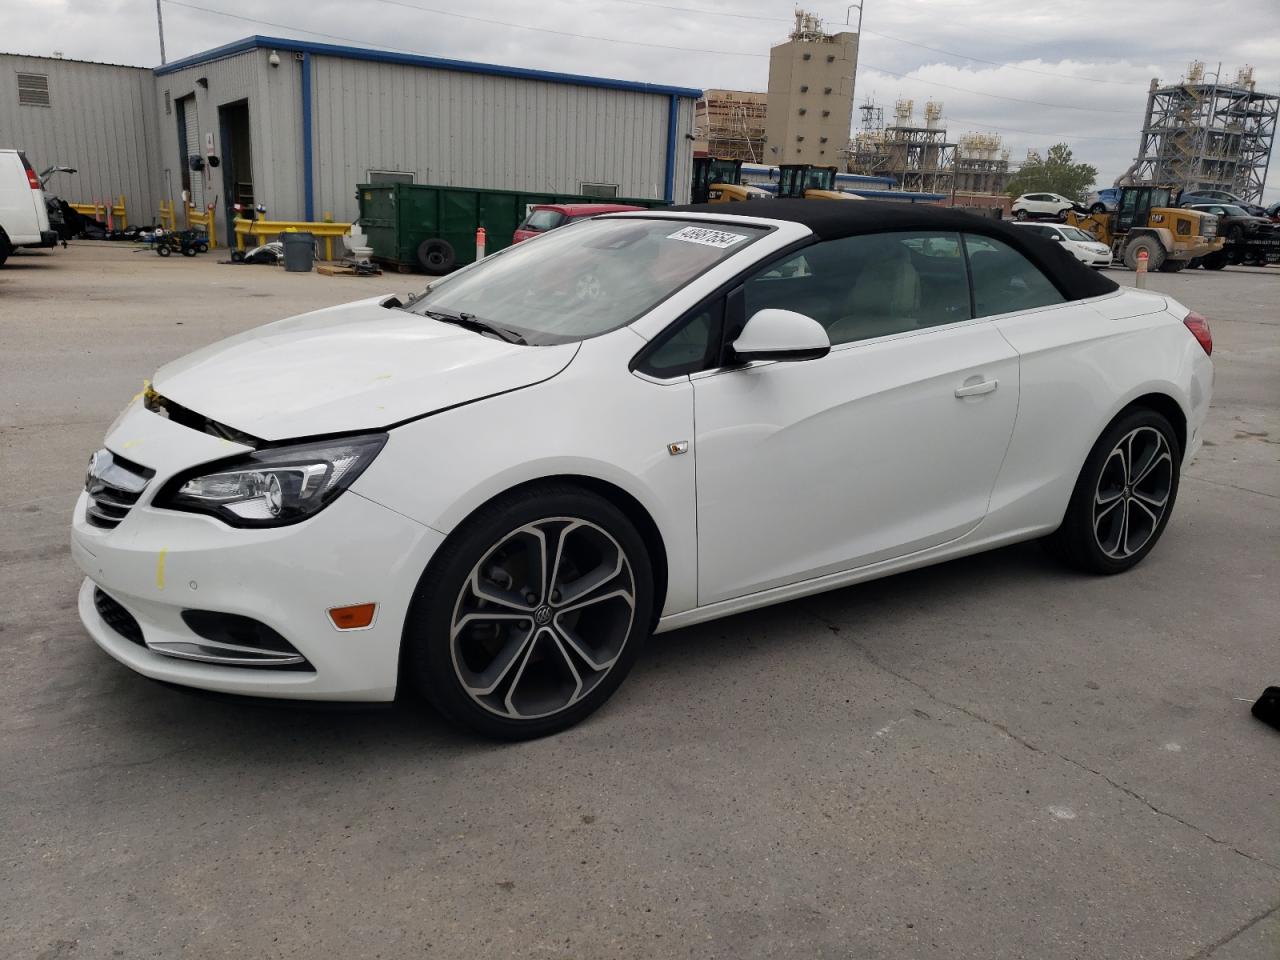 vin: W04WT3N53GG129417 W04WT3N53GG129417 2016 buick cascada 1600 for Sale in 70129 2348, La - New Orleans, New Orleans, USA